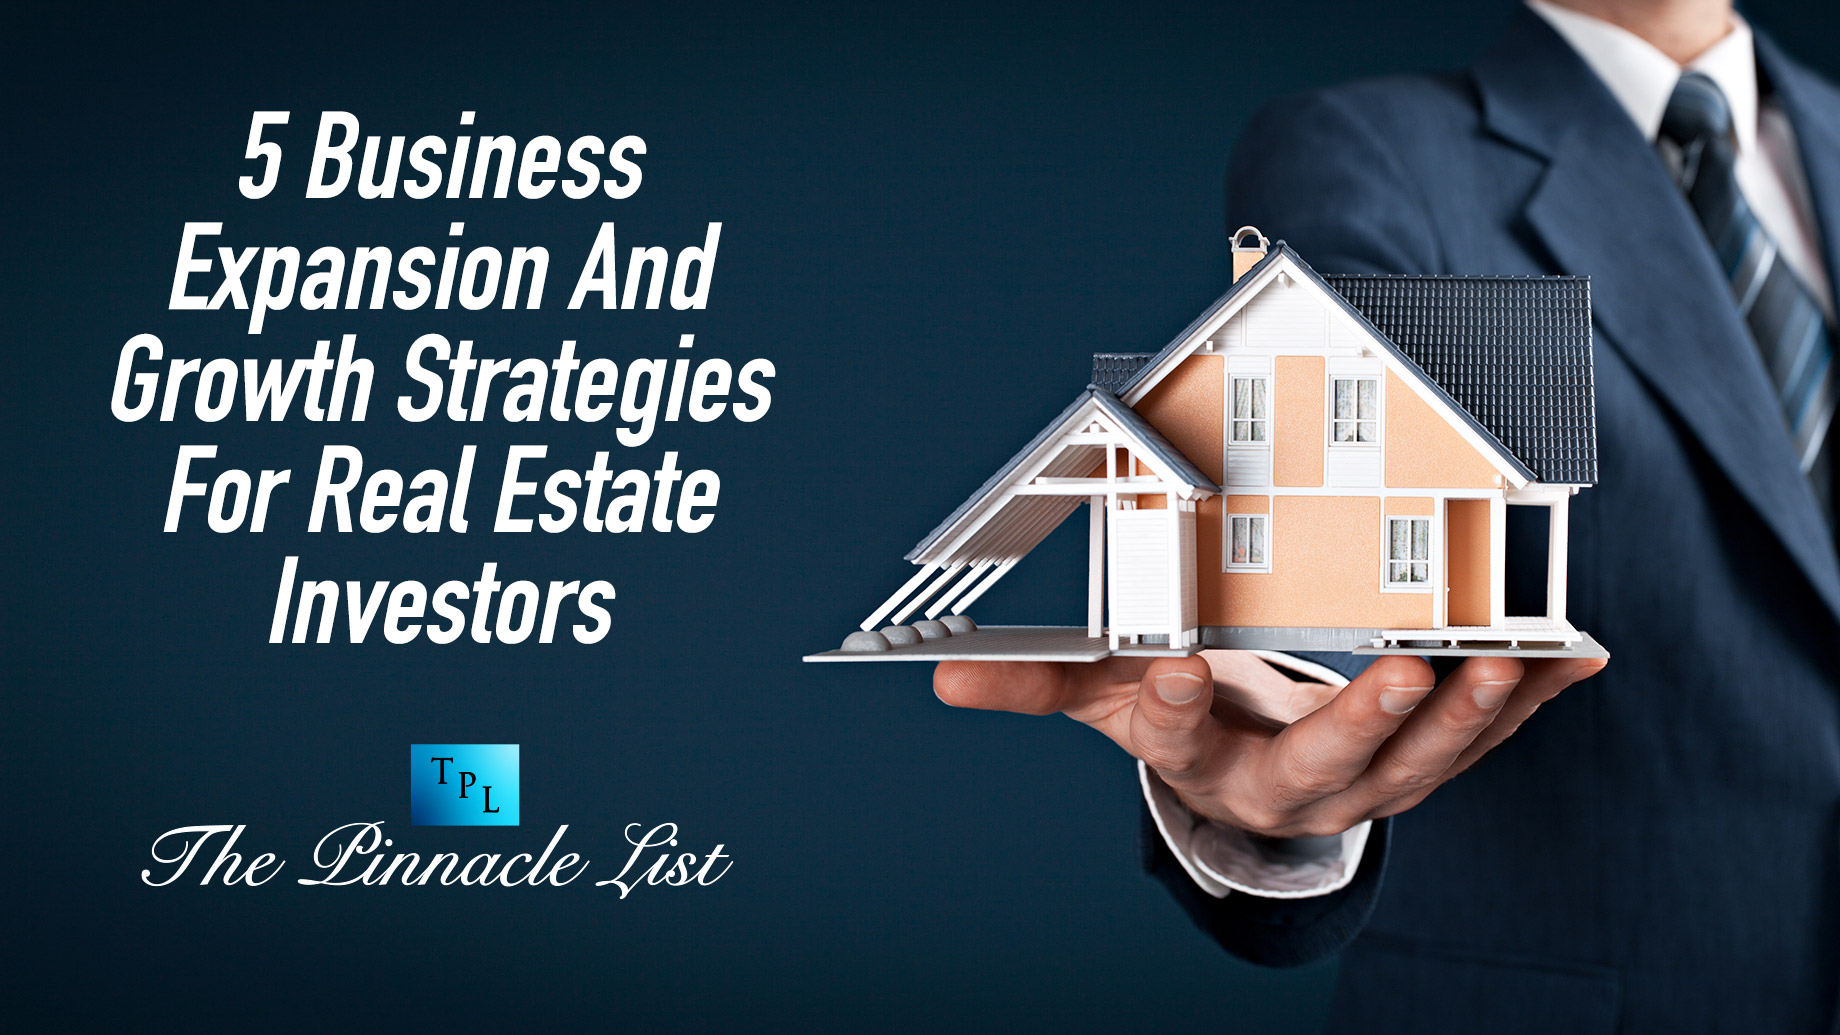 5 Business Expansion And Growth Strategies For Real Estate Investors